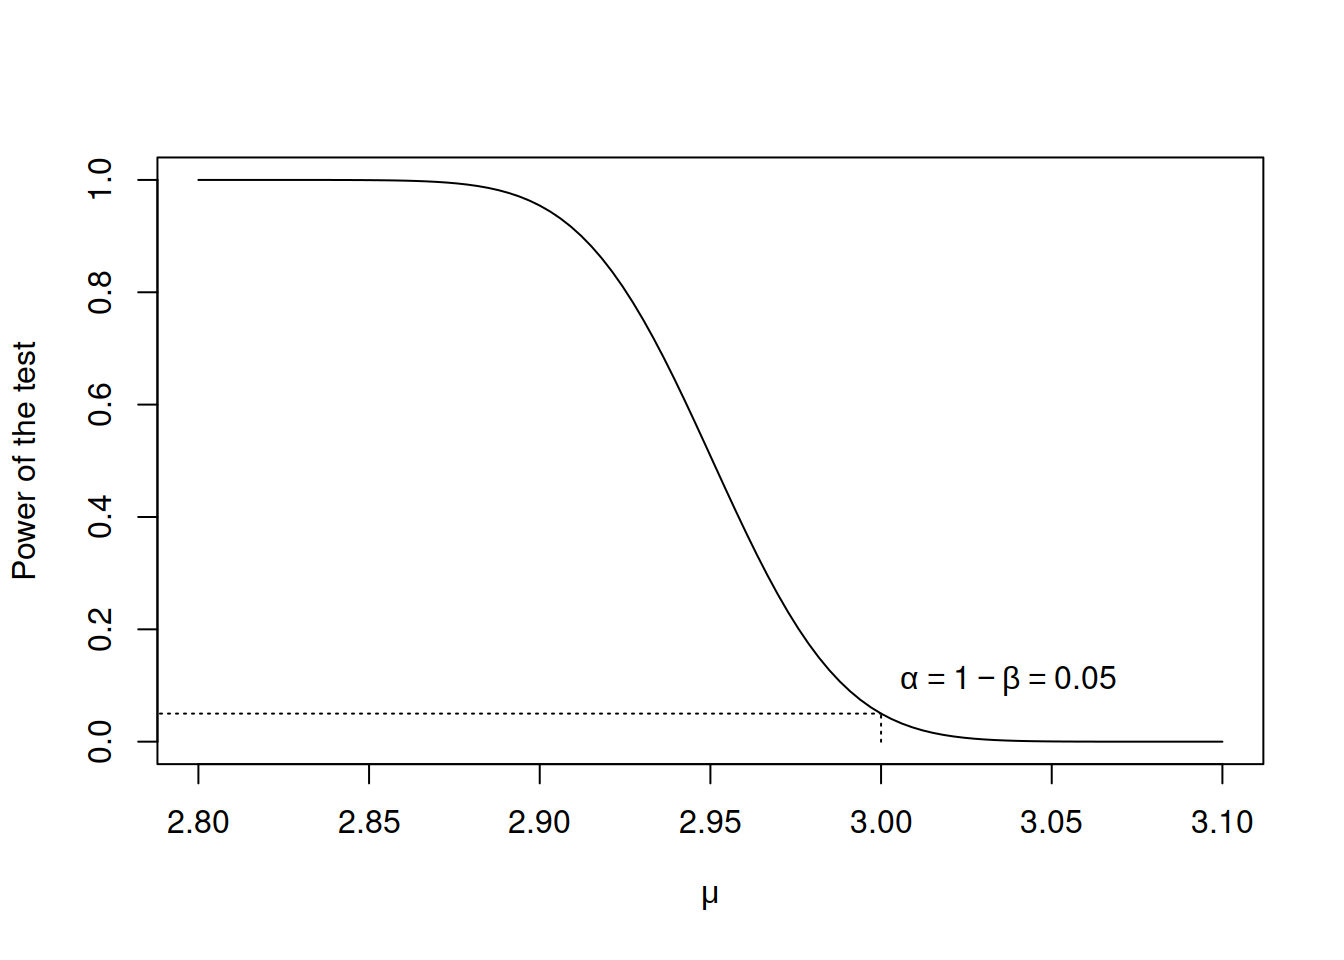 Power curve for the z-test in the example.